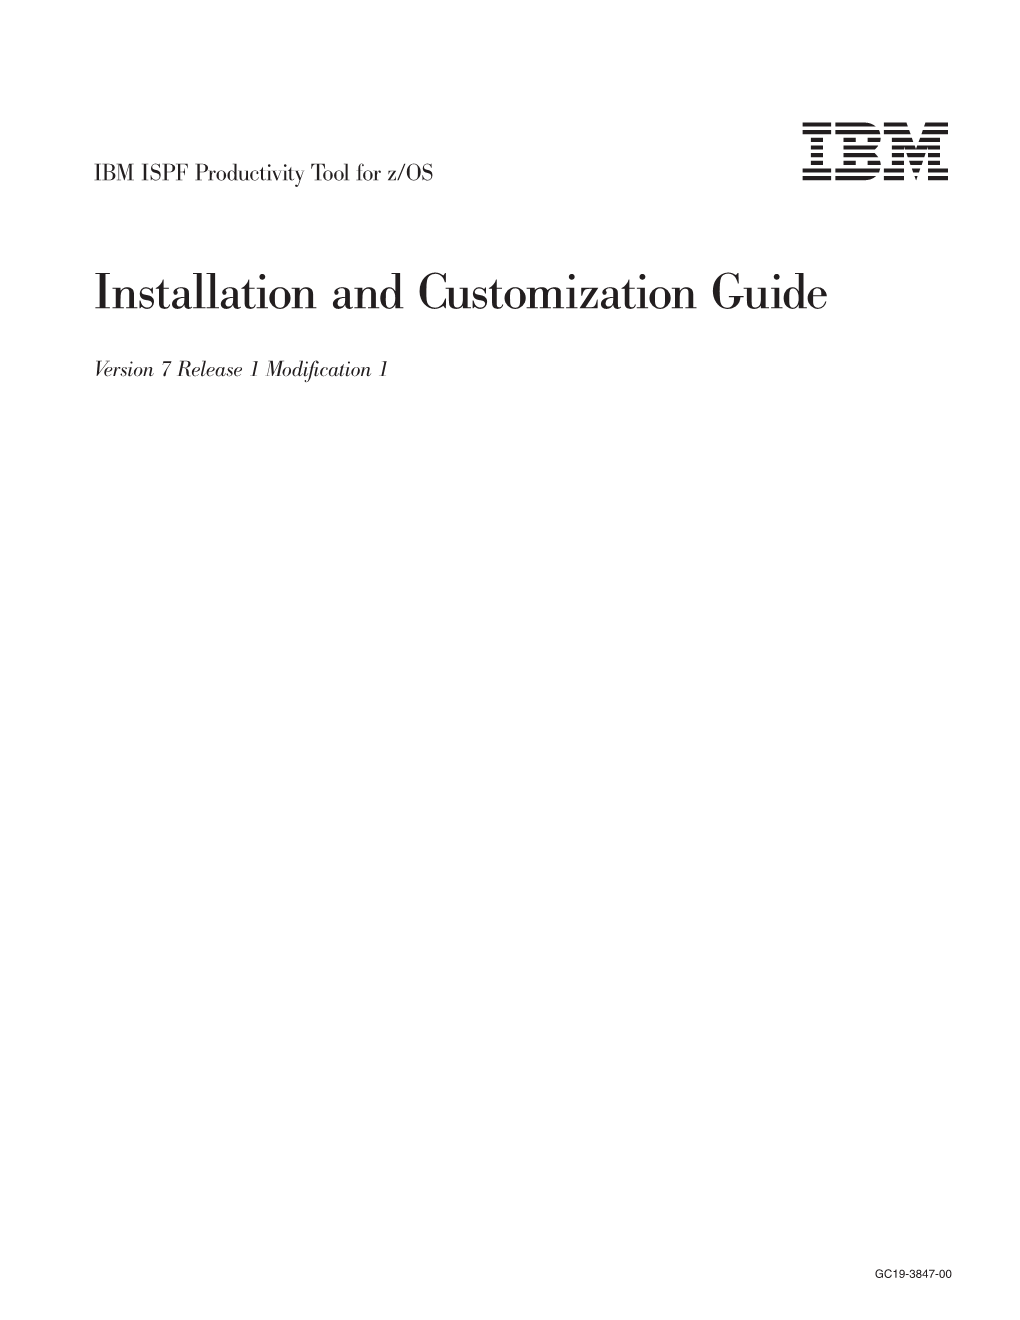 ISPF Productivity Tool V7 R1 M1 Installation and Customization Guide Chapter 1